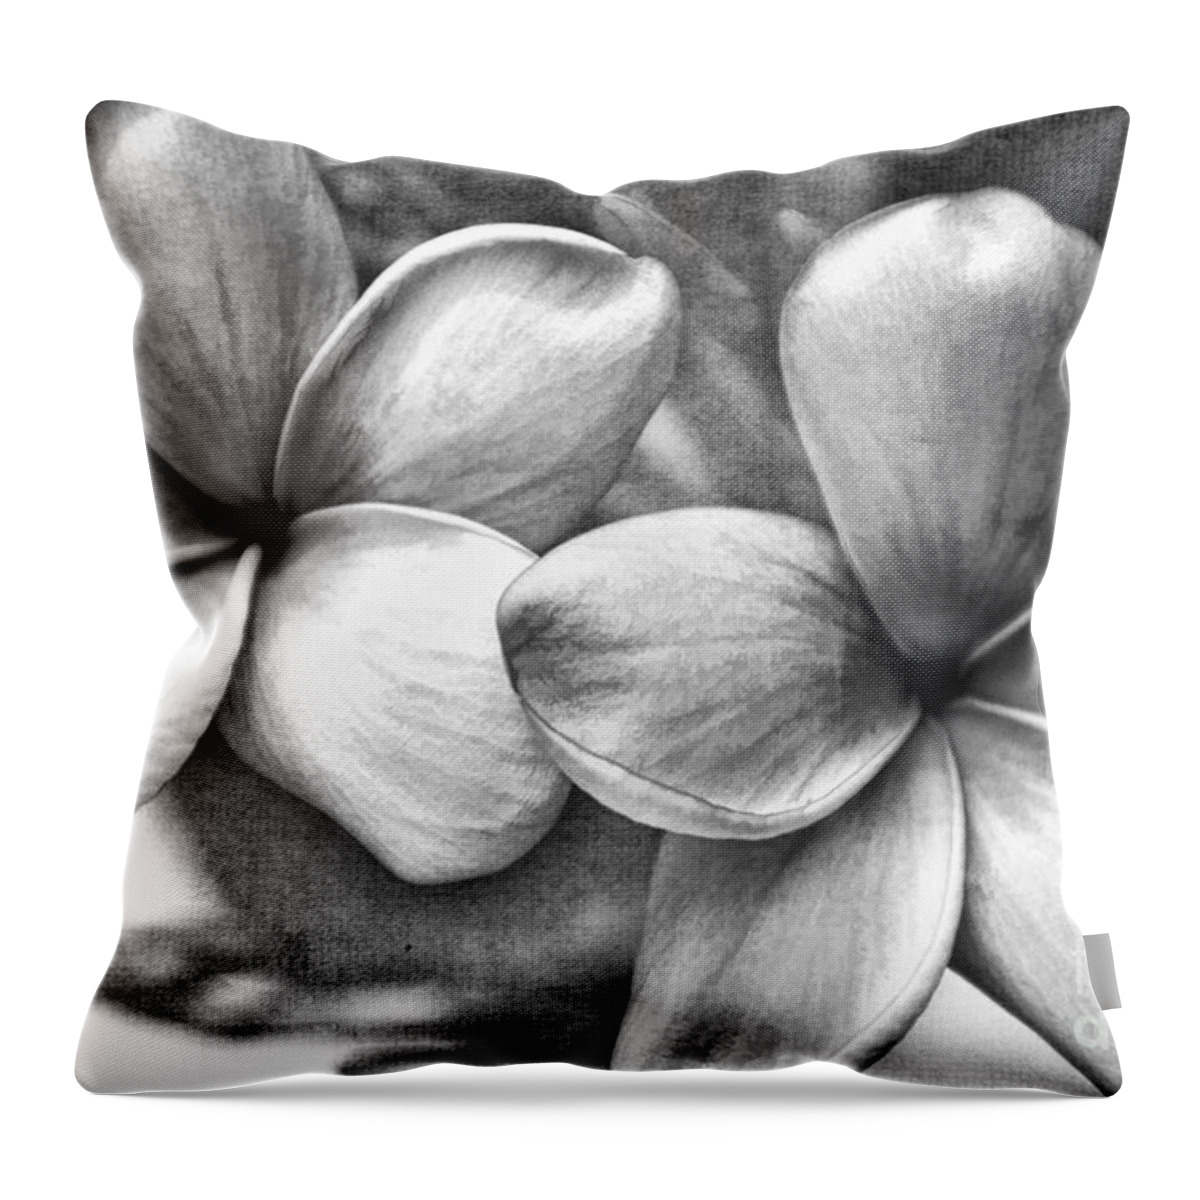 Monochrome Throw Pillow featuring the photograph Frangipani In Black And White by Peggy Hughes